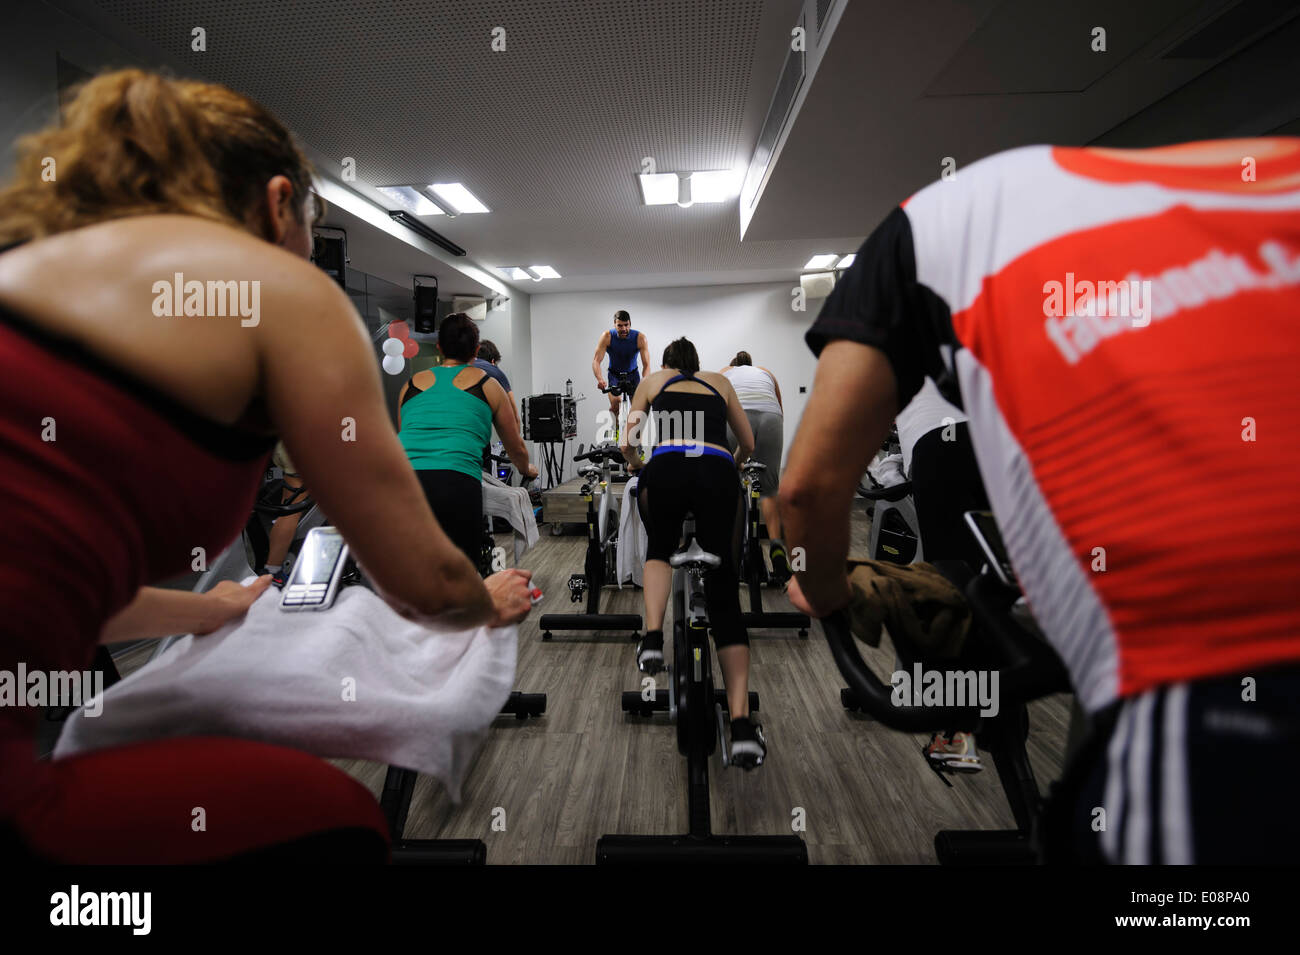 View from the back of people riding stationary bicycle during a spinning class at the gym Stock Photo